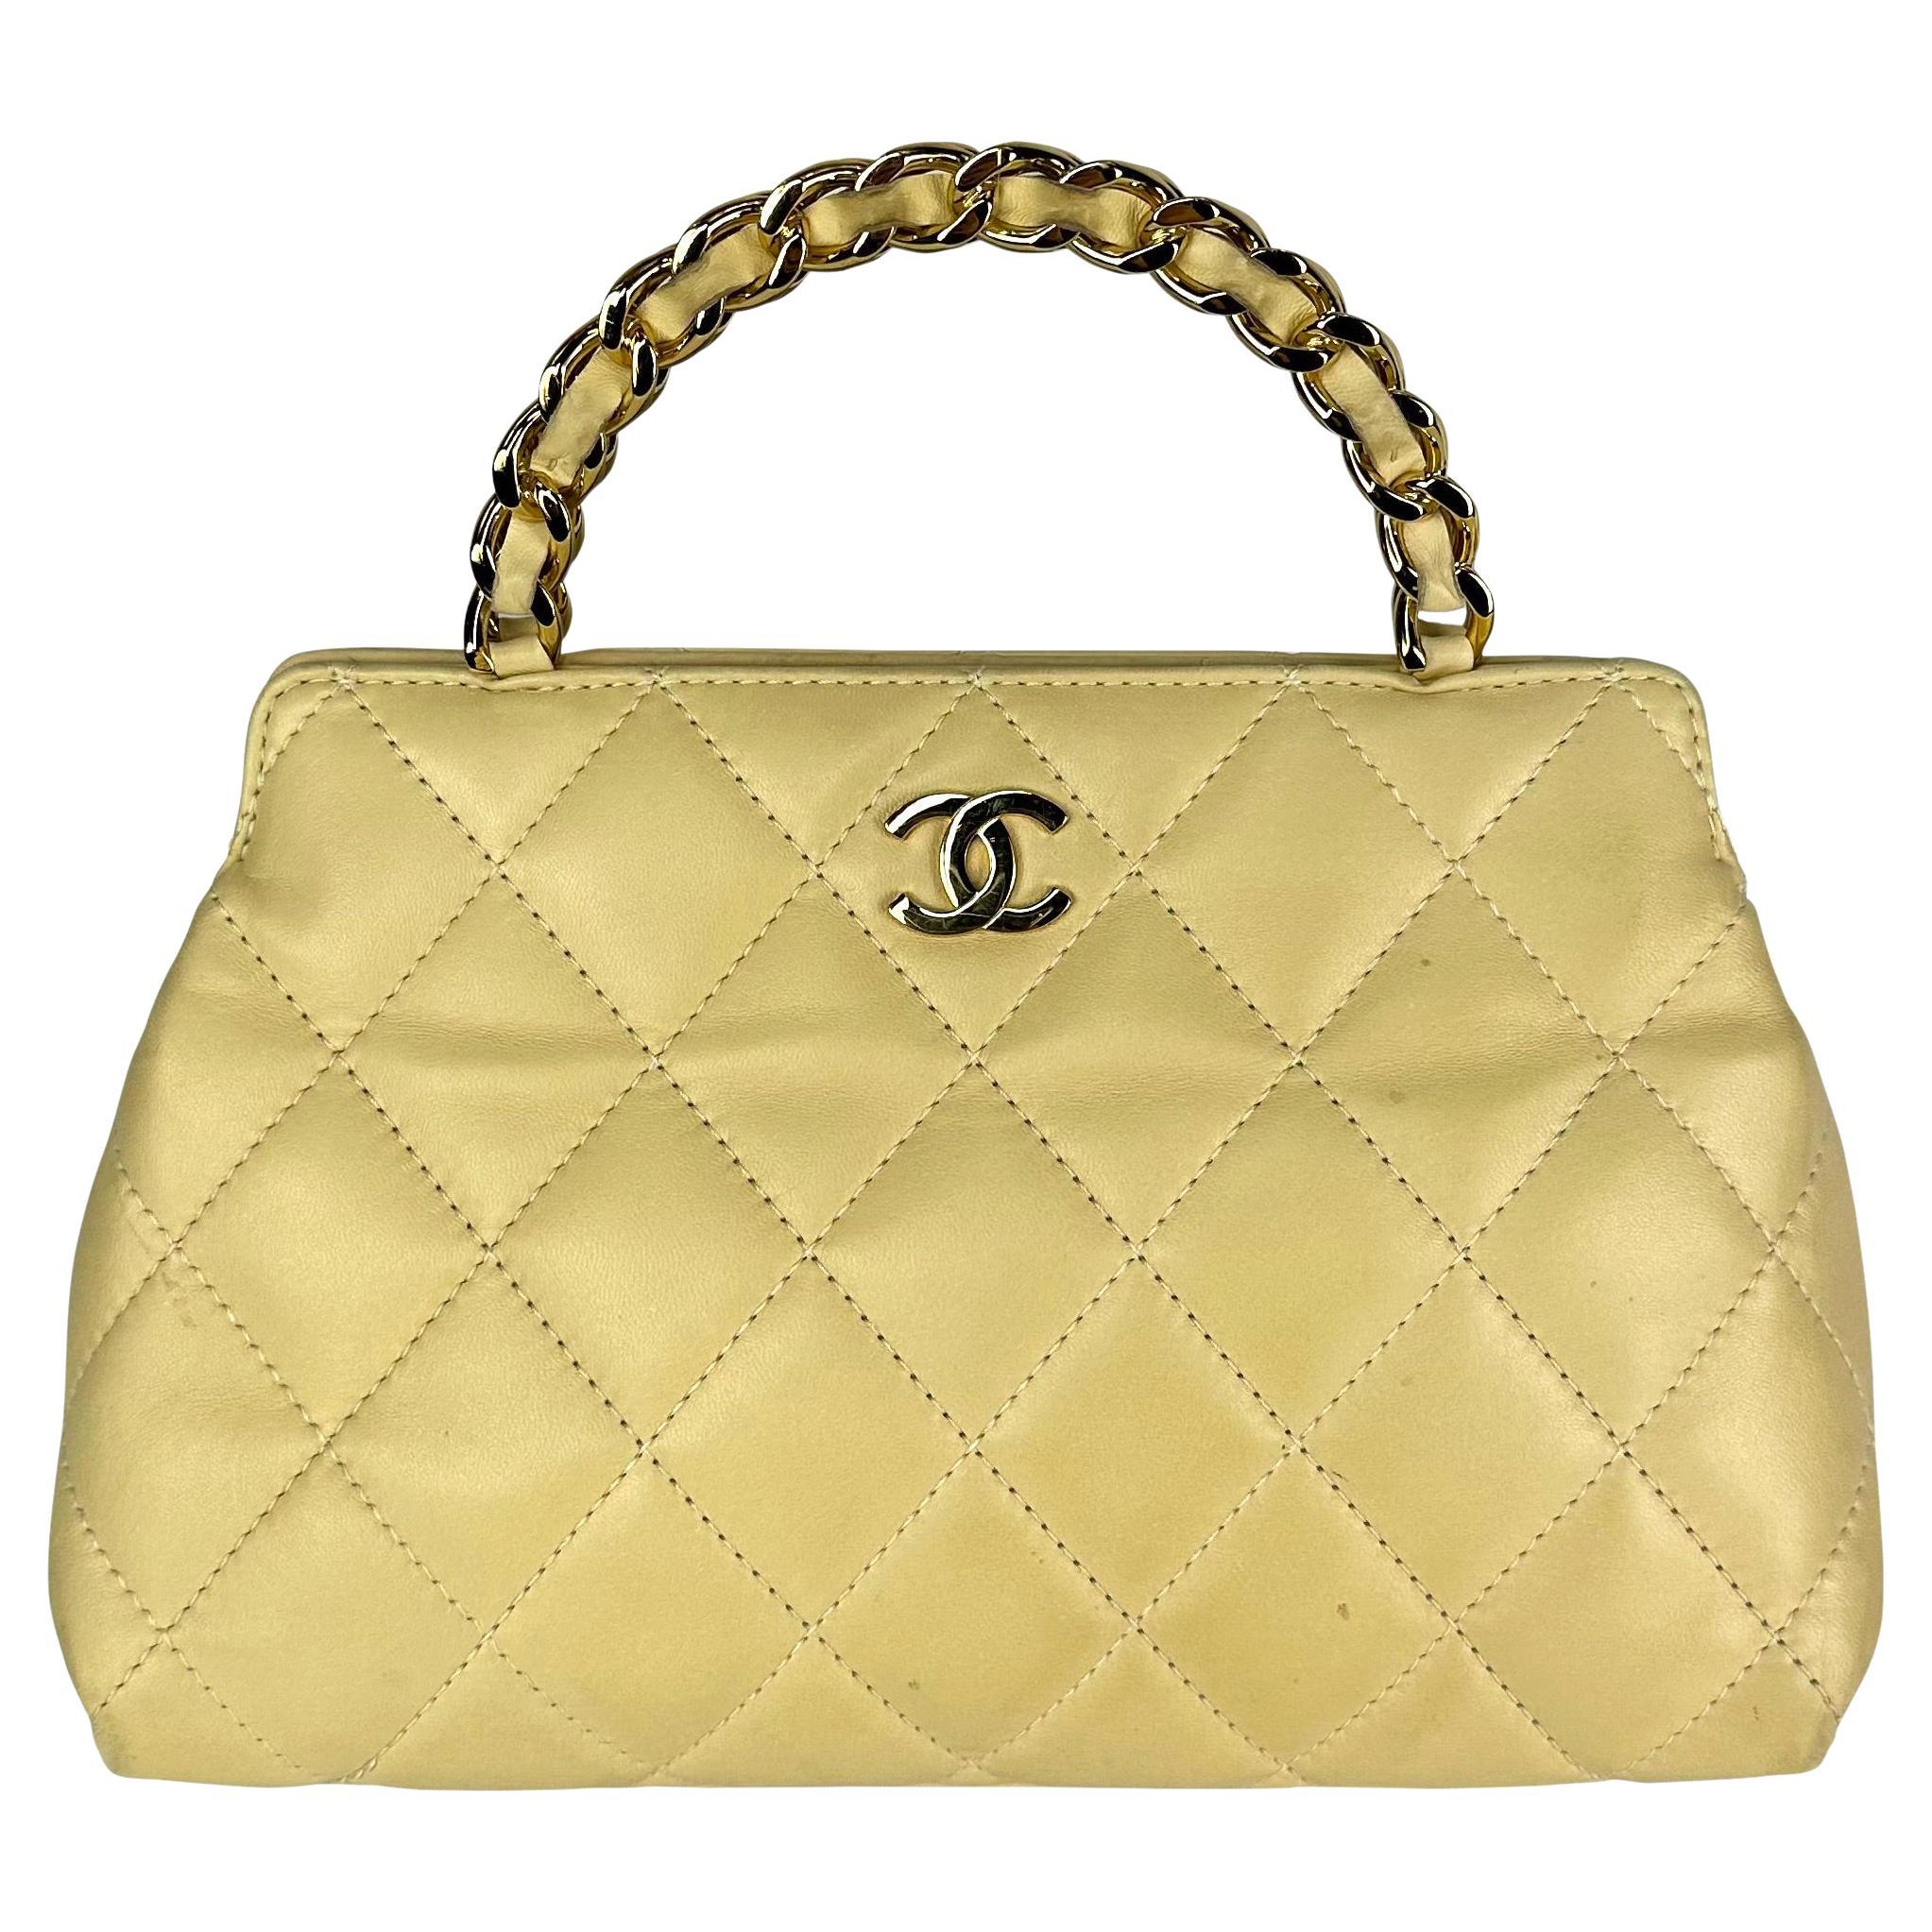 2004 Chanel by Karl Lagerfeld Beige Quilted Leather Top Handle Mini Bag 